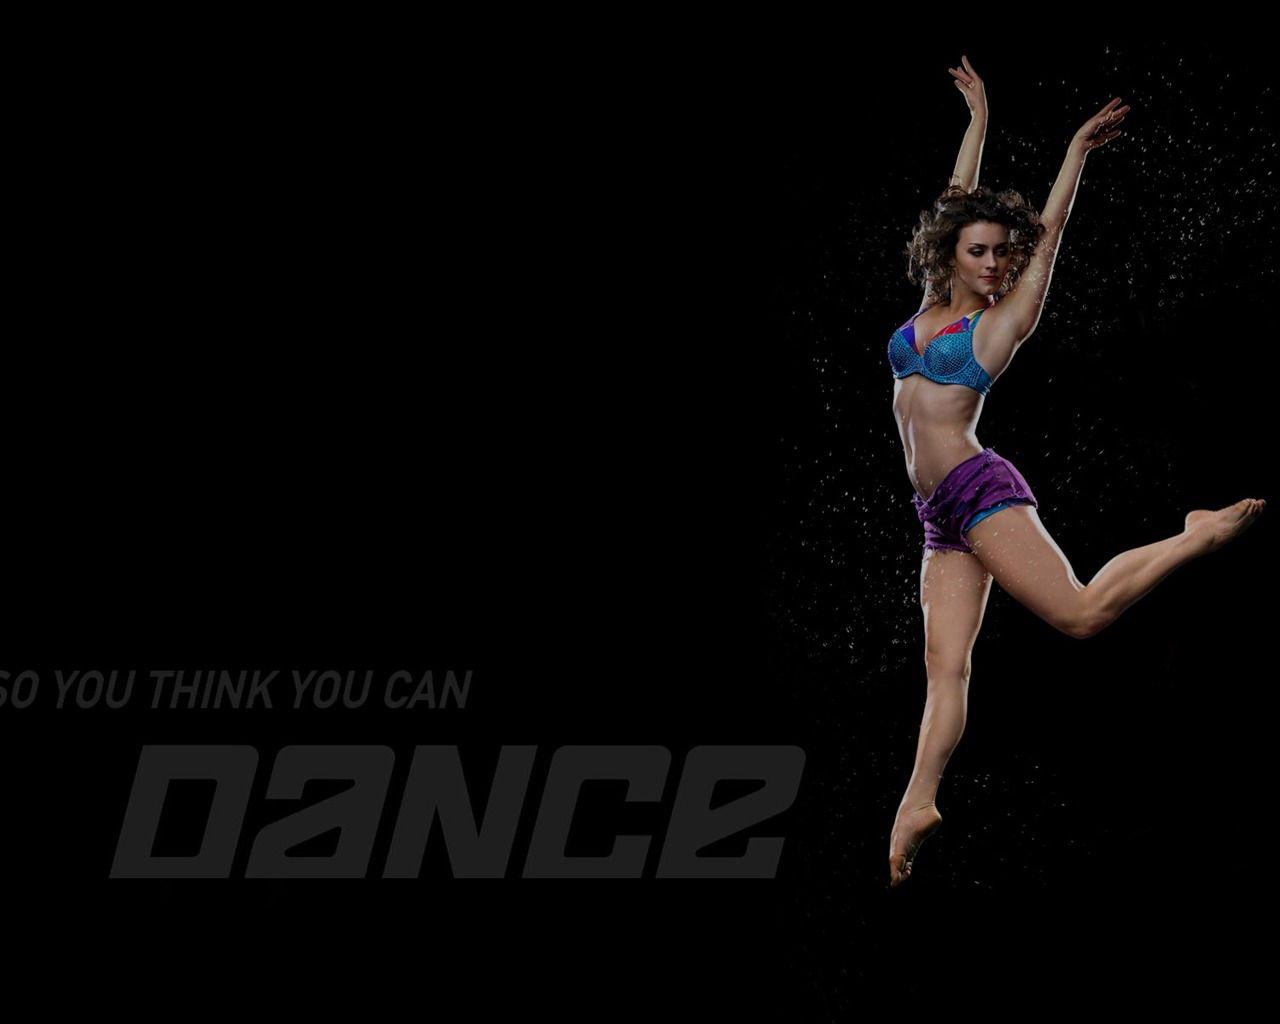 So You Think You Can Dance 舞林争霸 壁纸(二)5 - 1280x1024